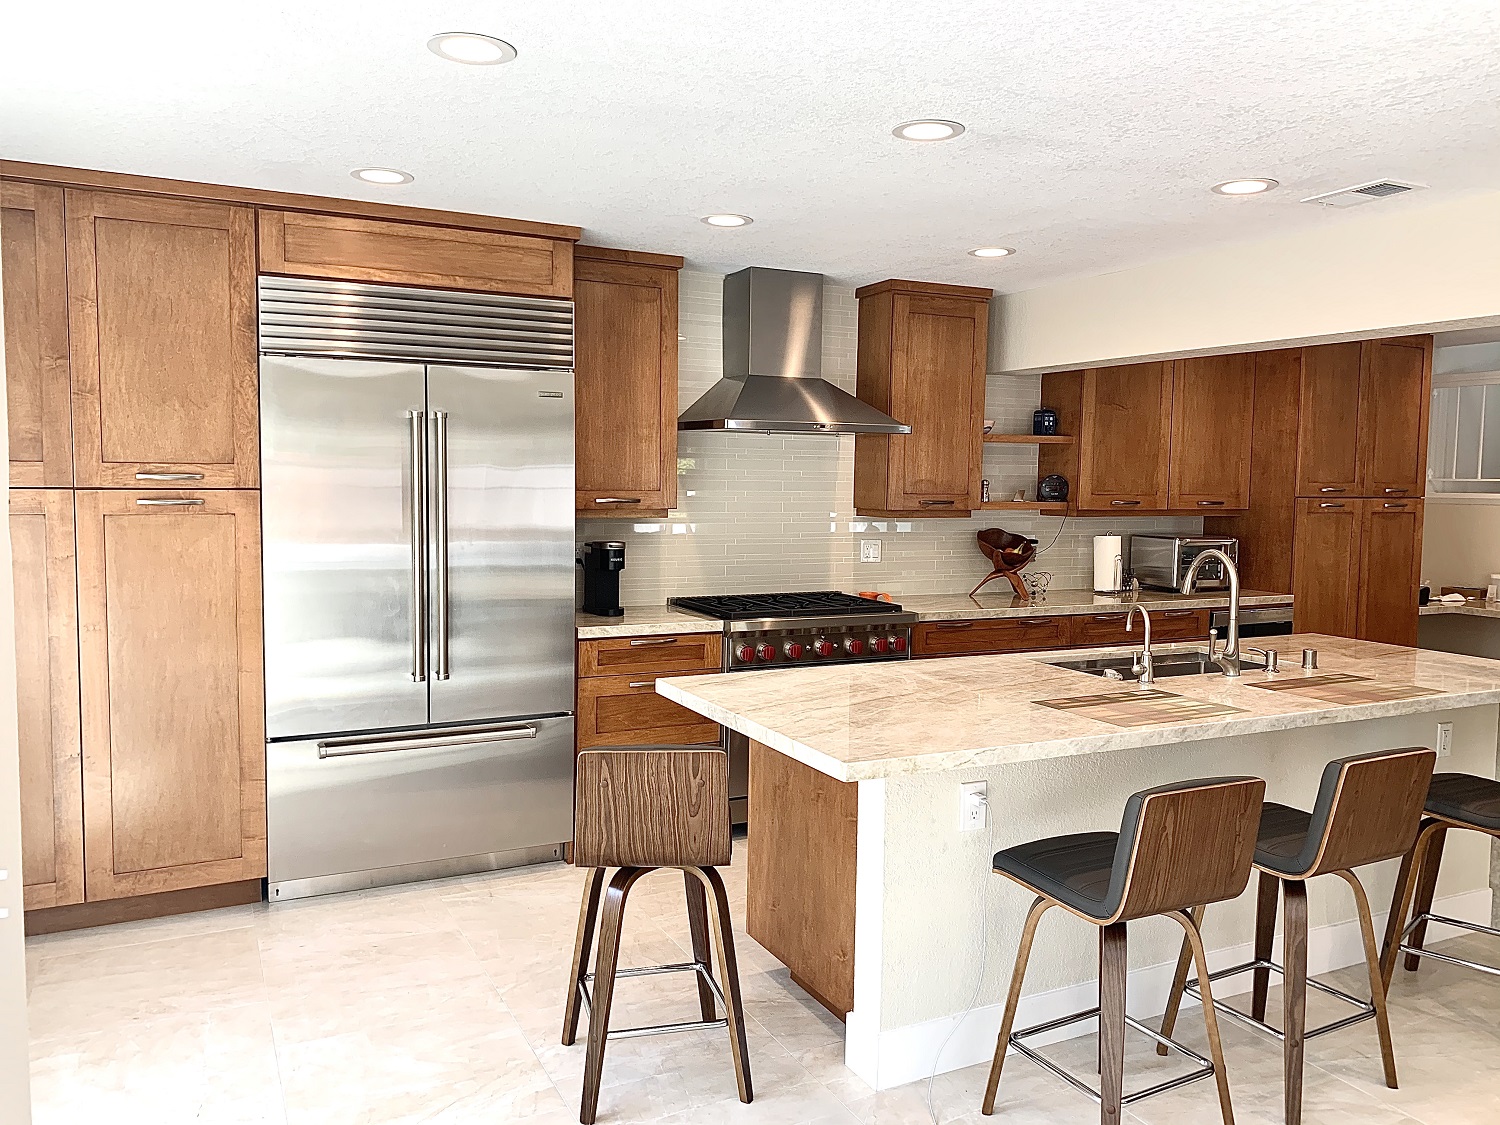 Kitchen Cabinets replacement in San Diego area